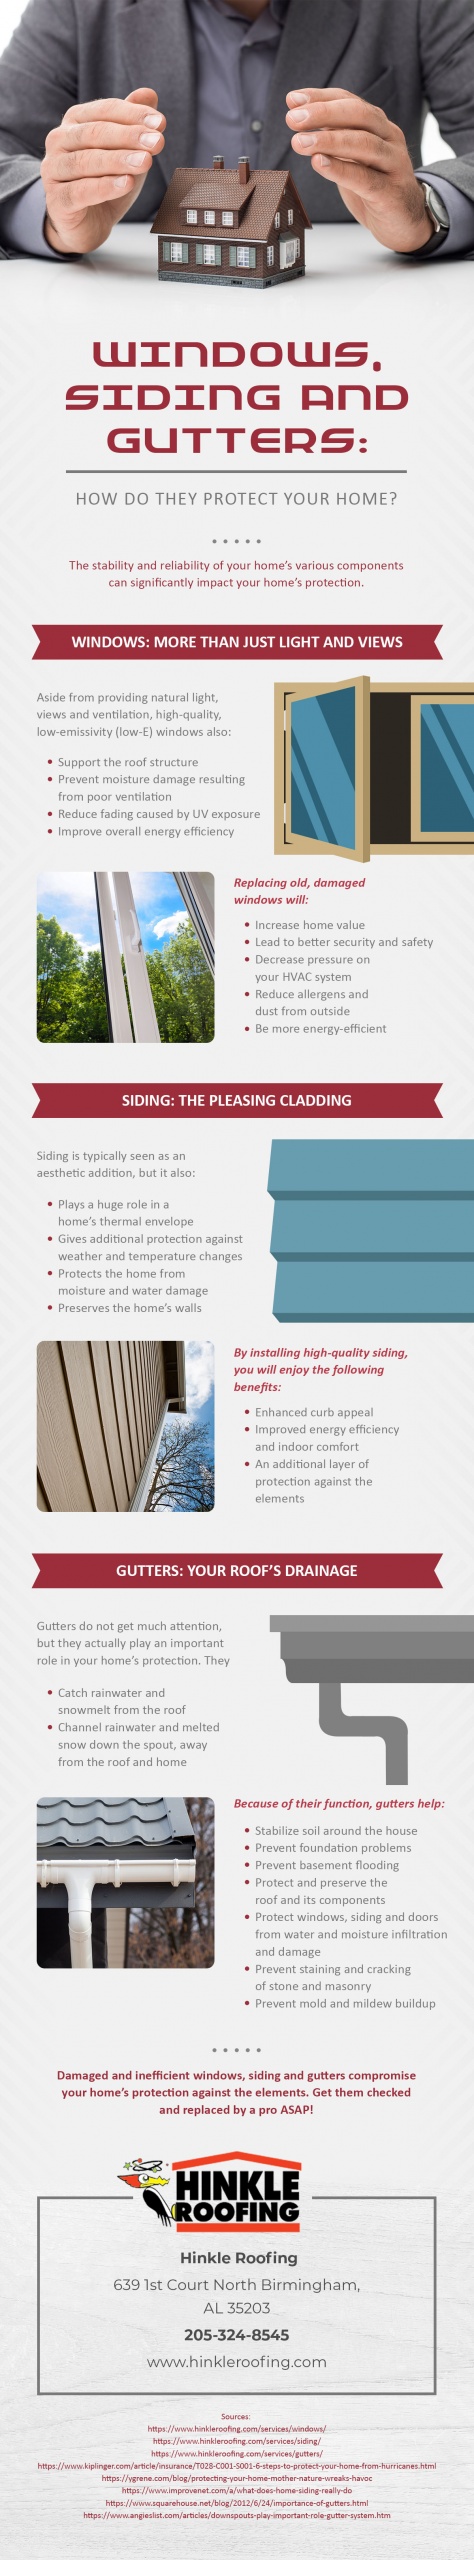 Infographic: Gutters Windows And Siding What They Do